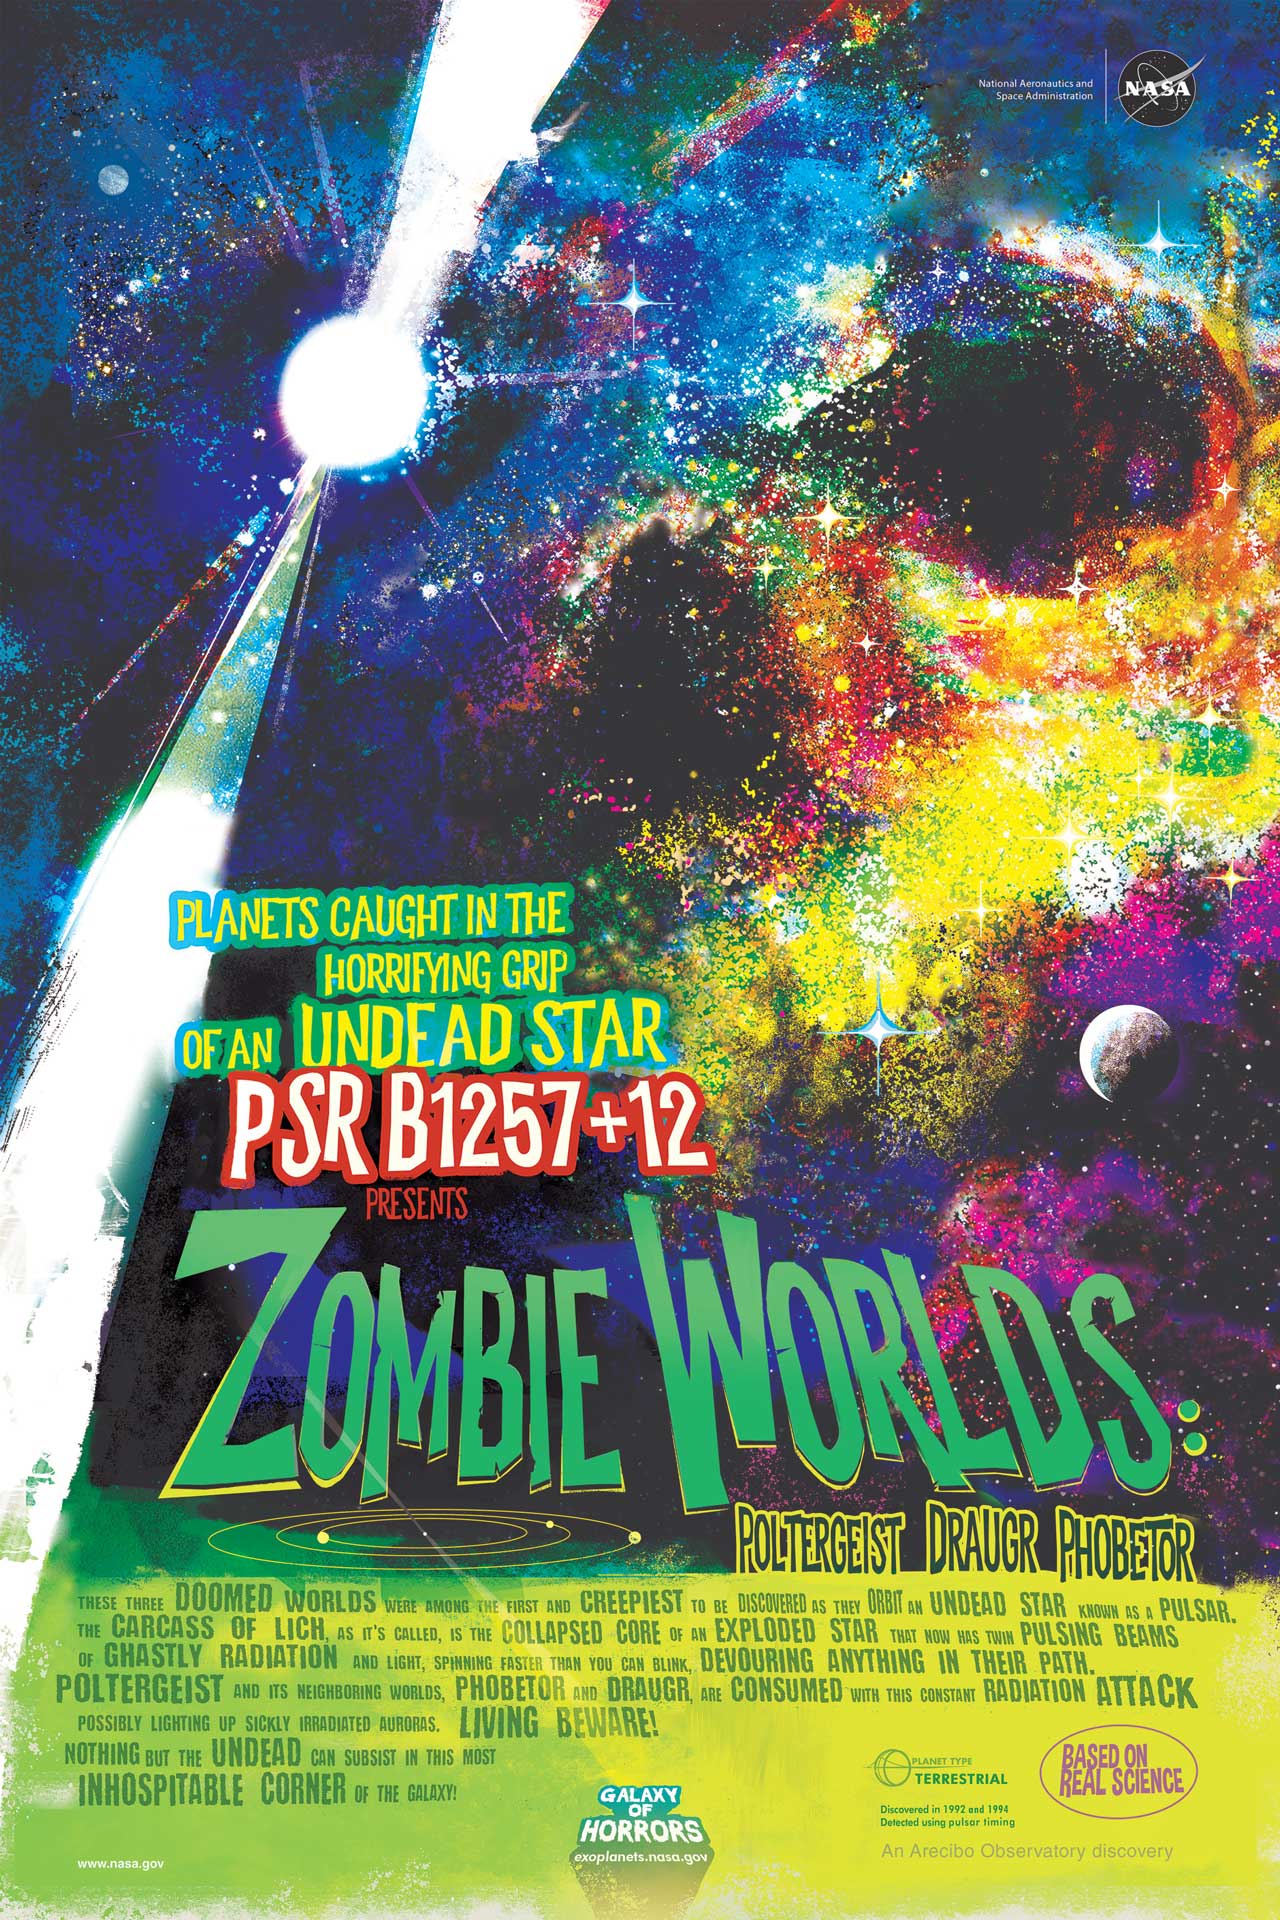 Zombie Worlds – "Galaxy of Horrors" poster (English)